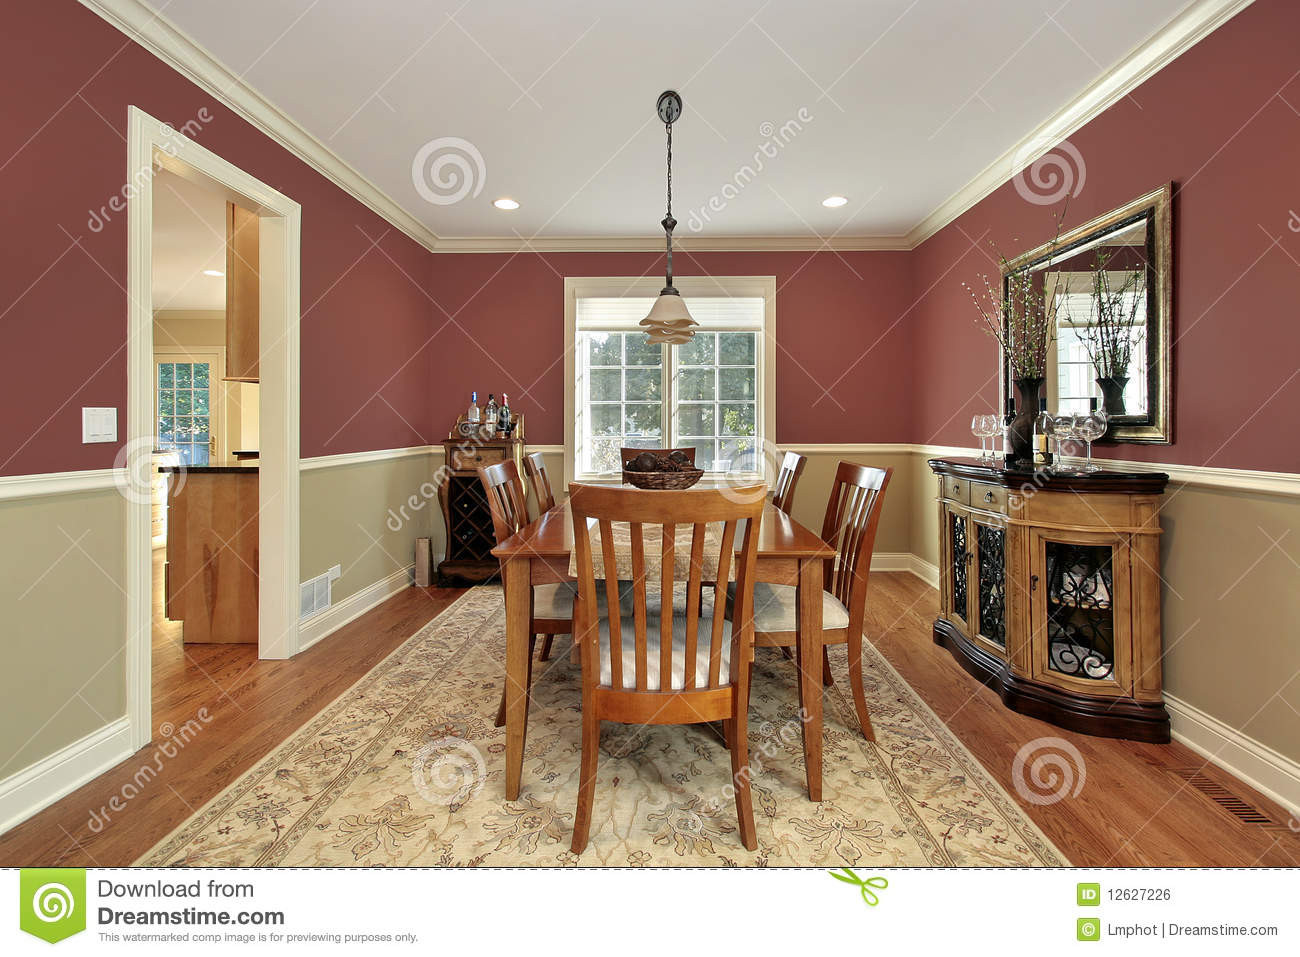 Two Toned Living Room Walls
 Dining Room With Two Toned Walls Stock Image of